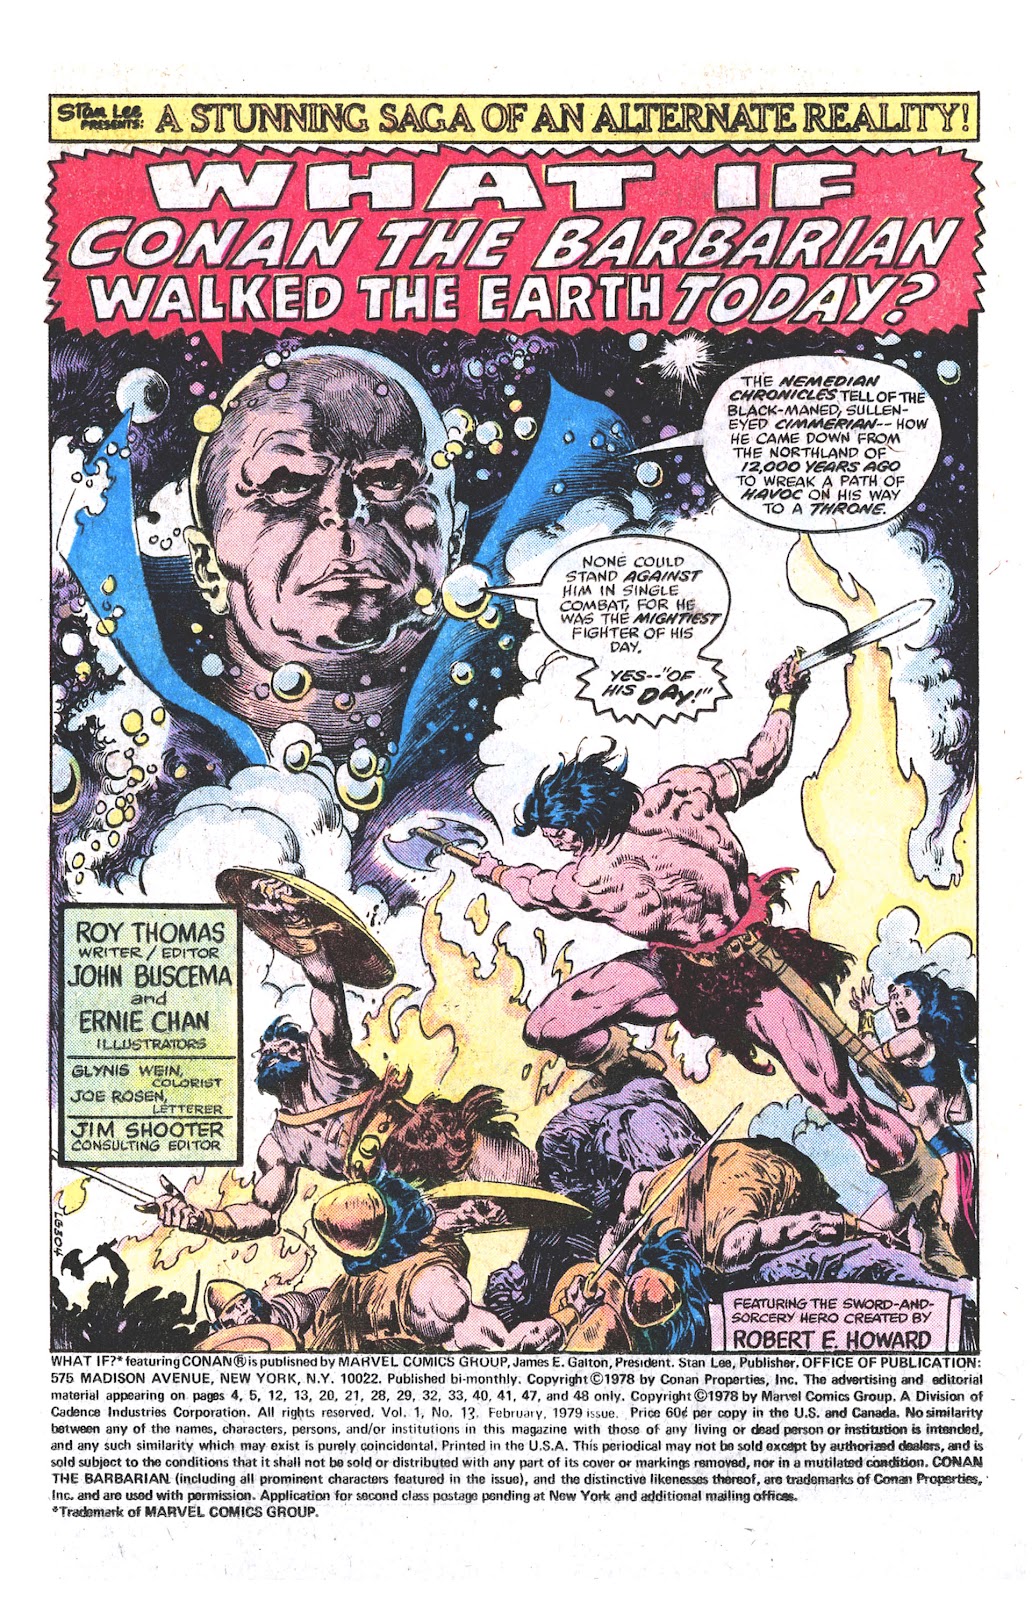 <{ $series->title }} issue 13 - Conan The Barbarian walked the Earth Today - Page 2